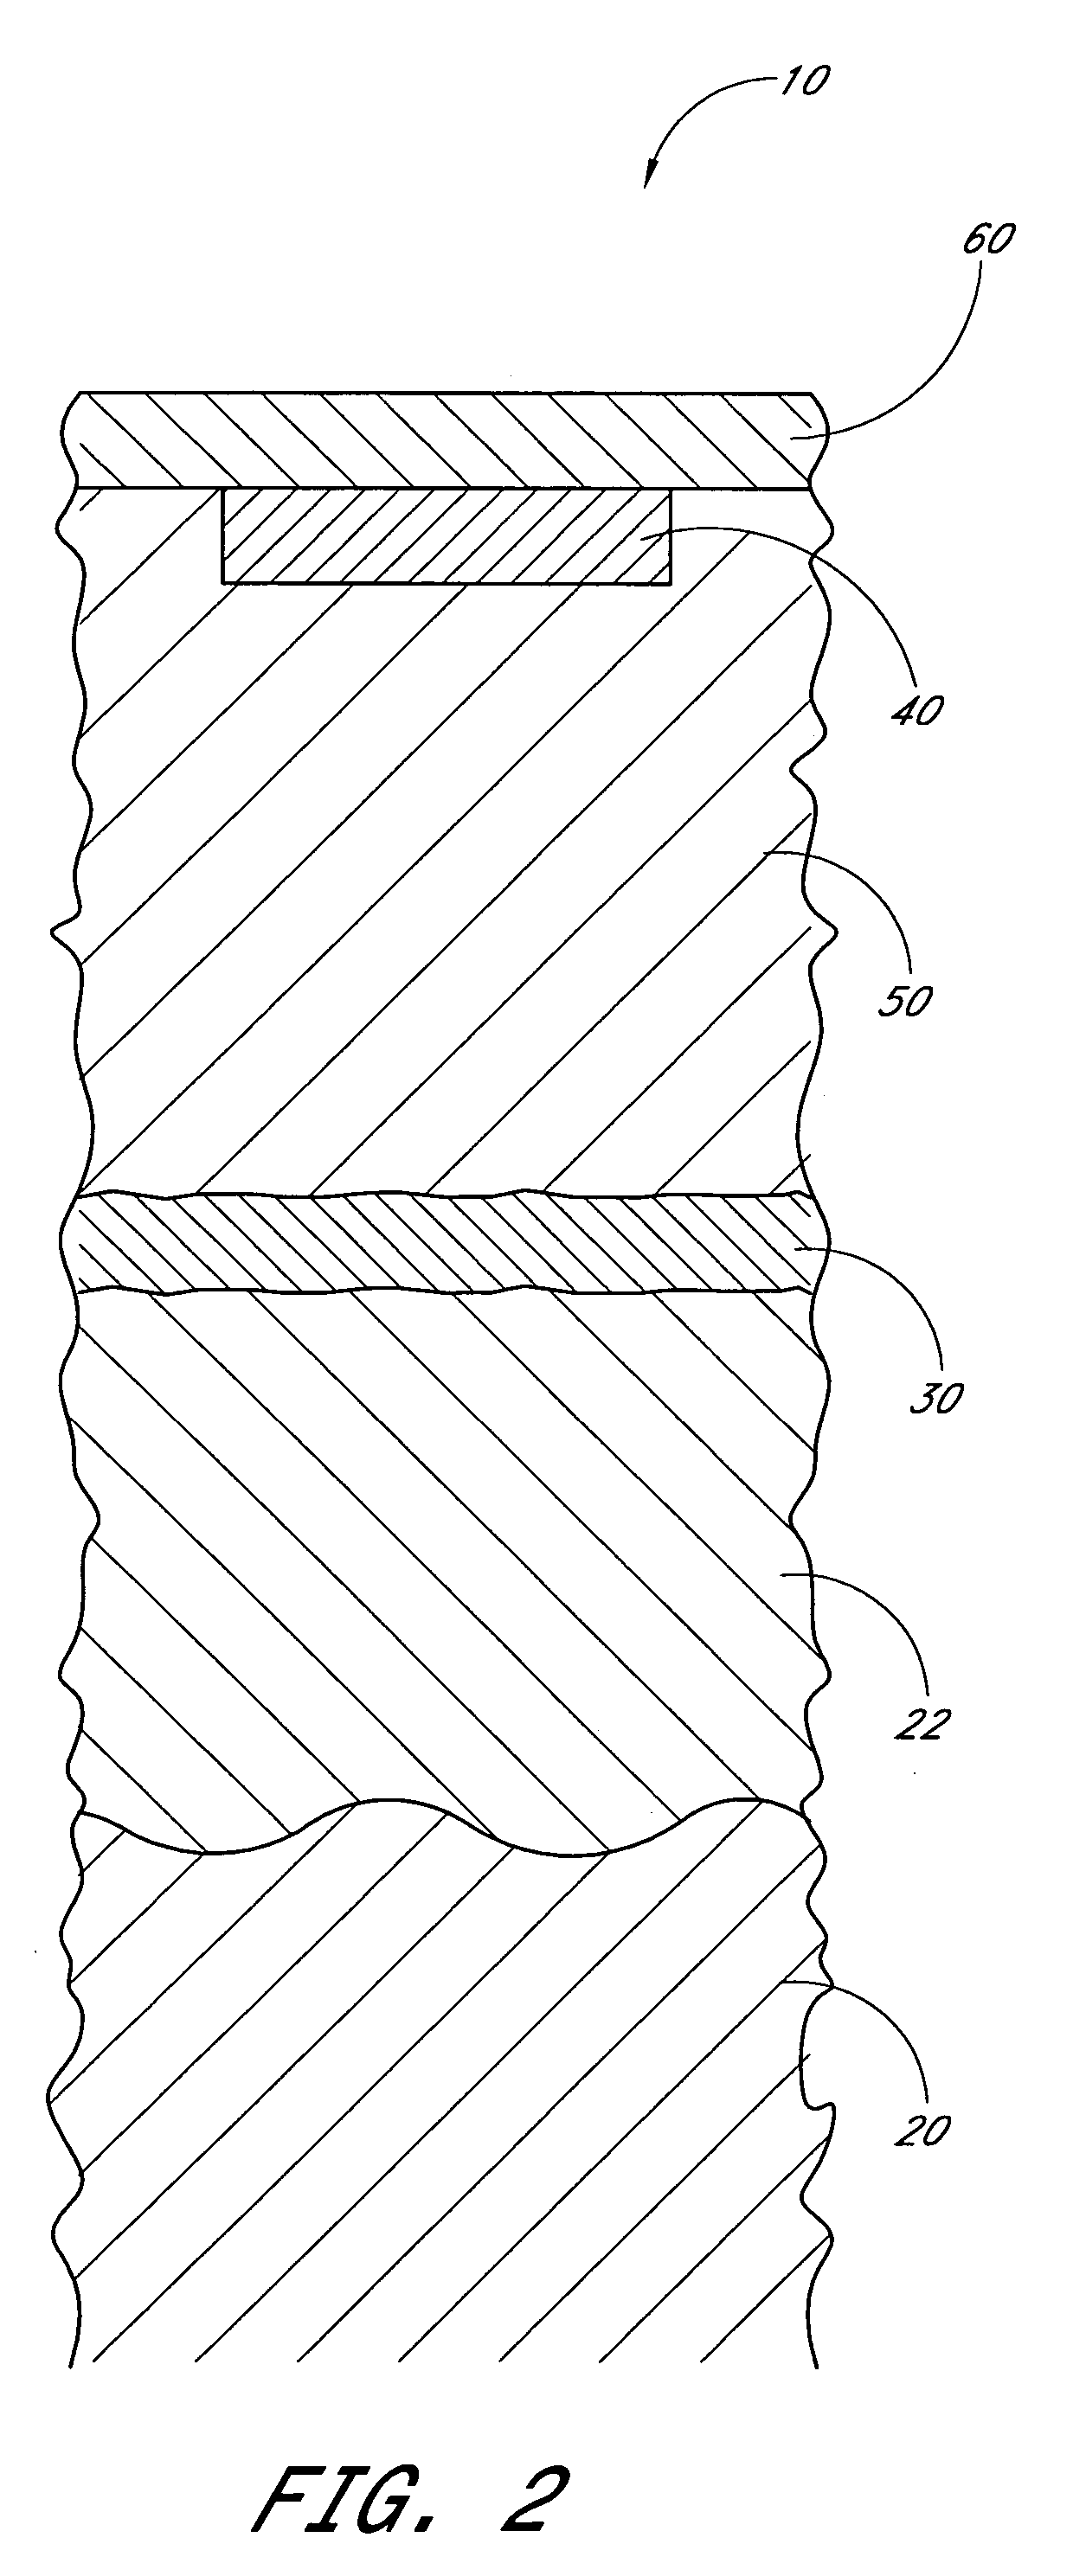 Device and method for providing phototheraphy to the brain